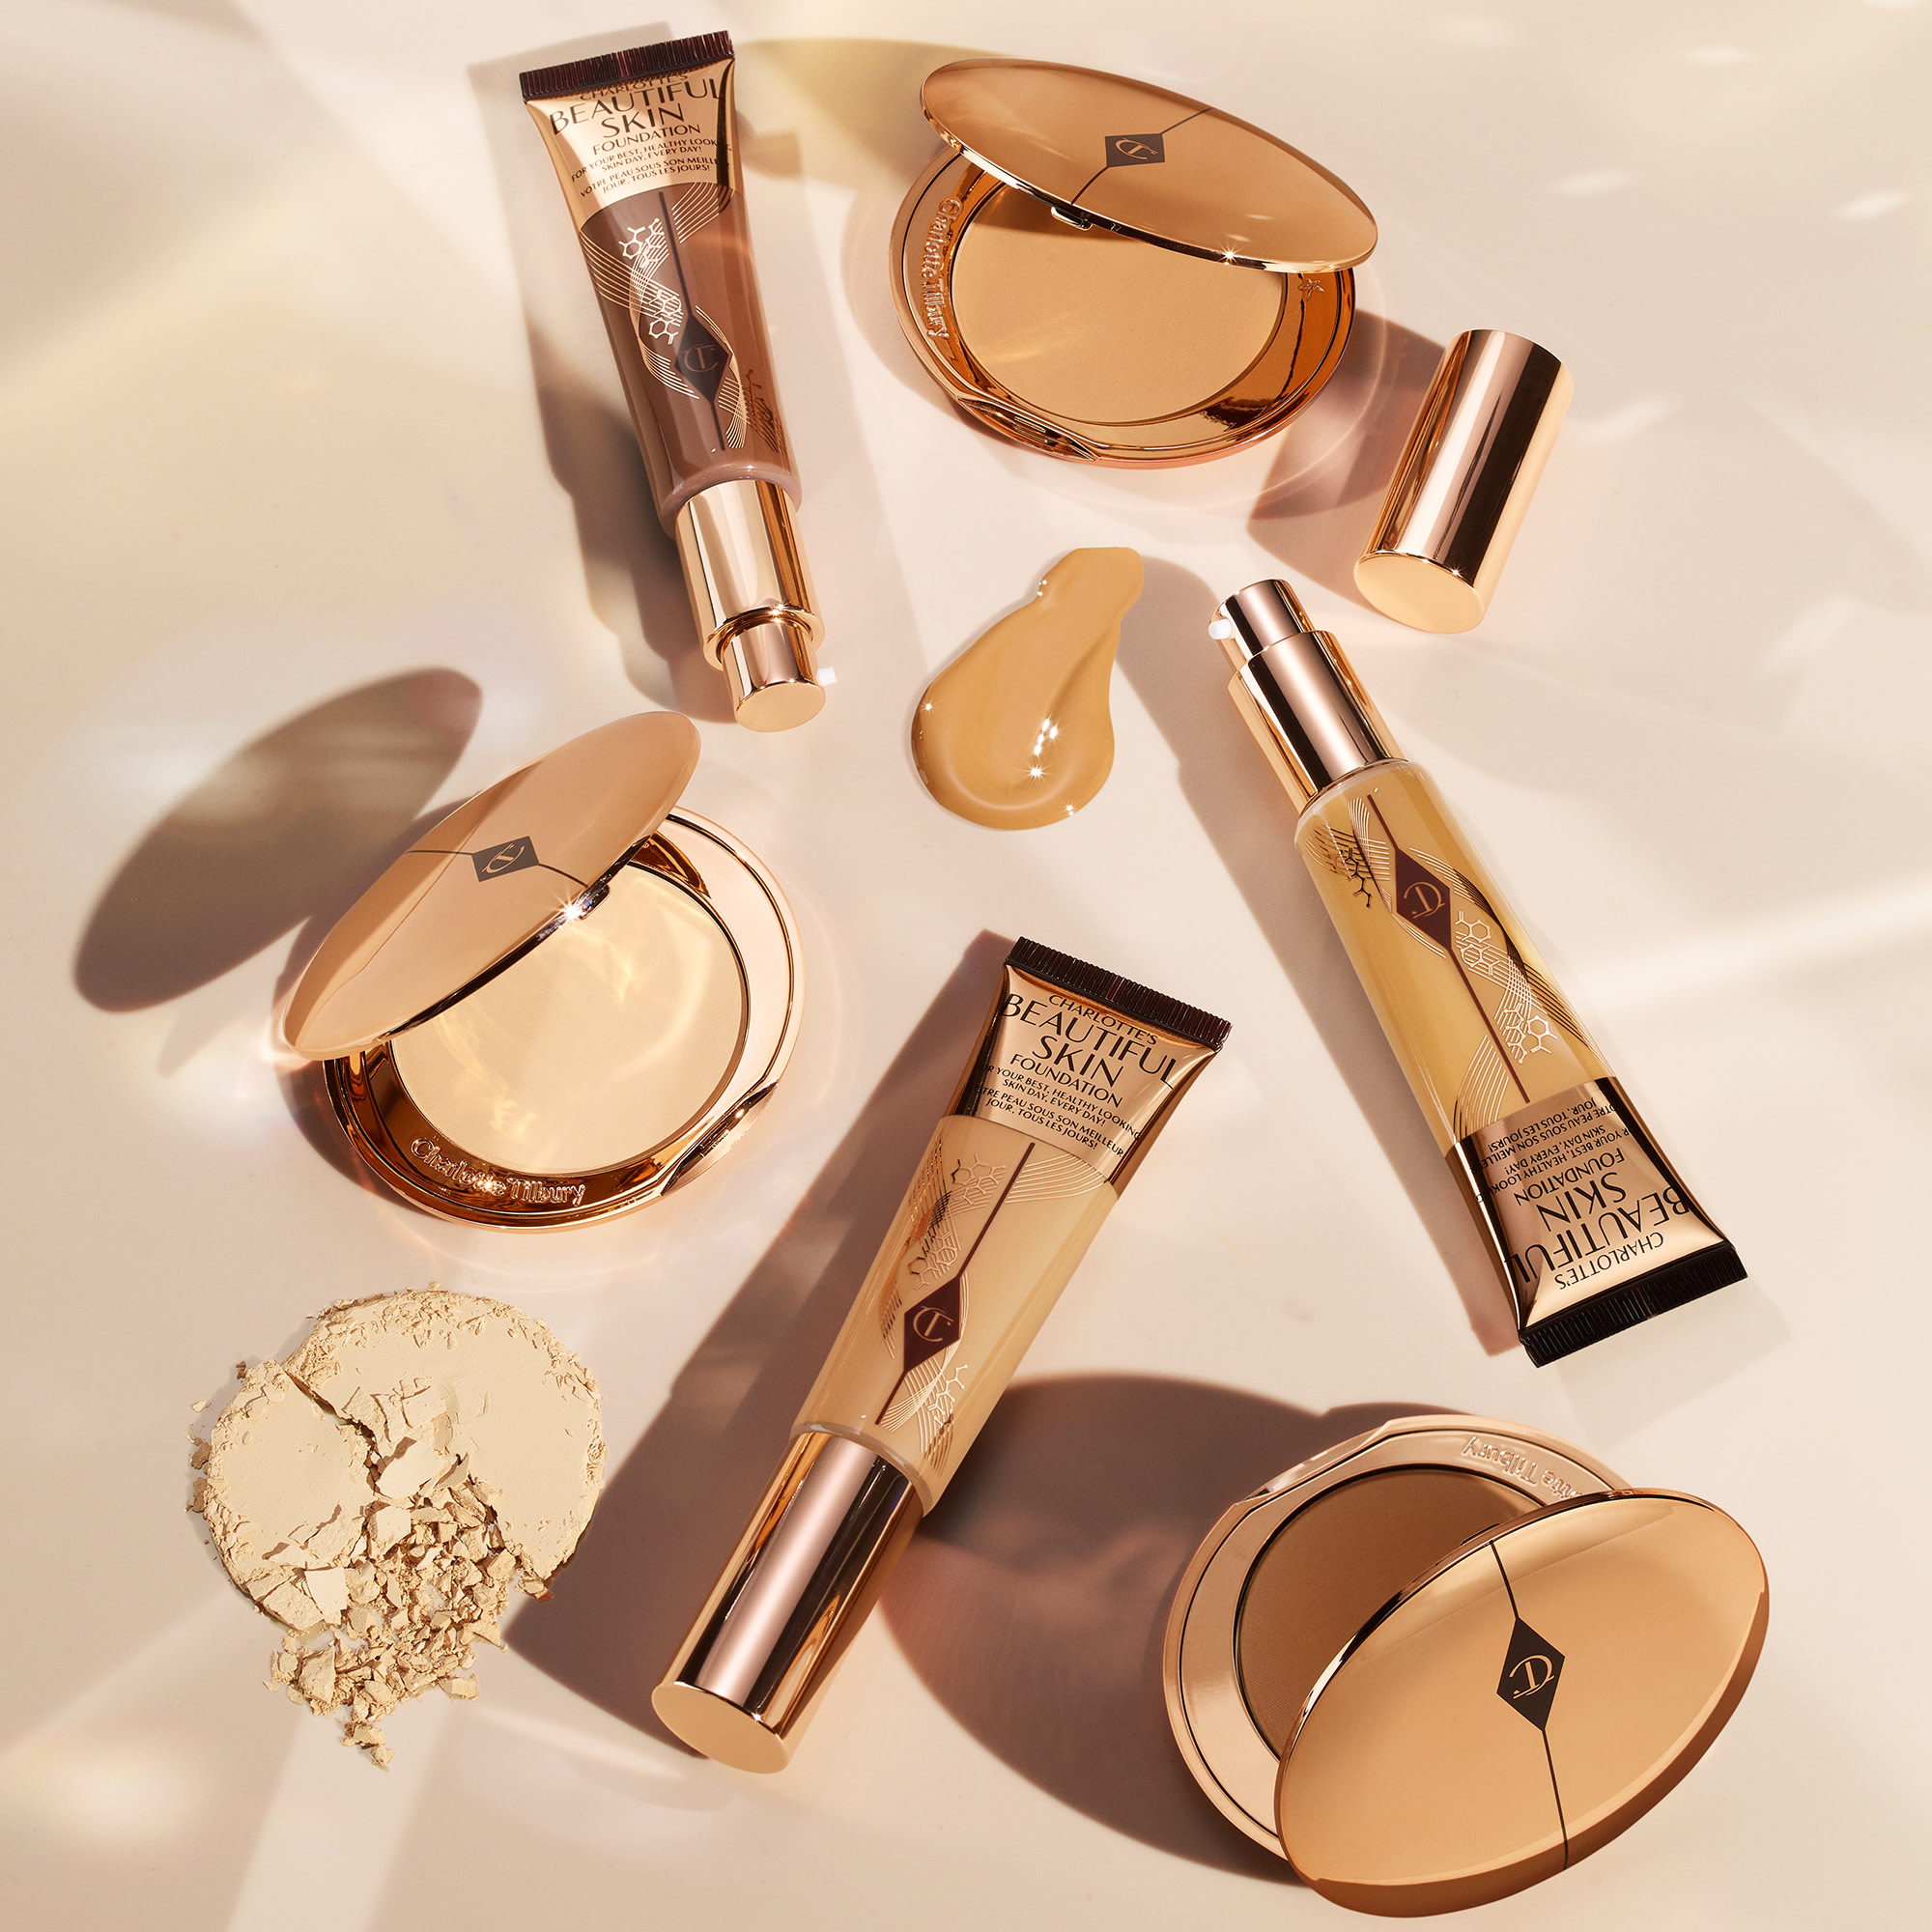 A collection of open, foundation tubes in gold packaging with a collection of open powder compacts in gold-coloured packaging. 